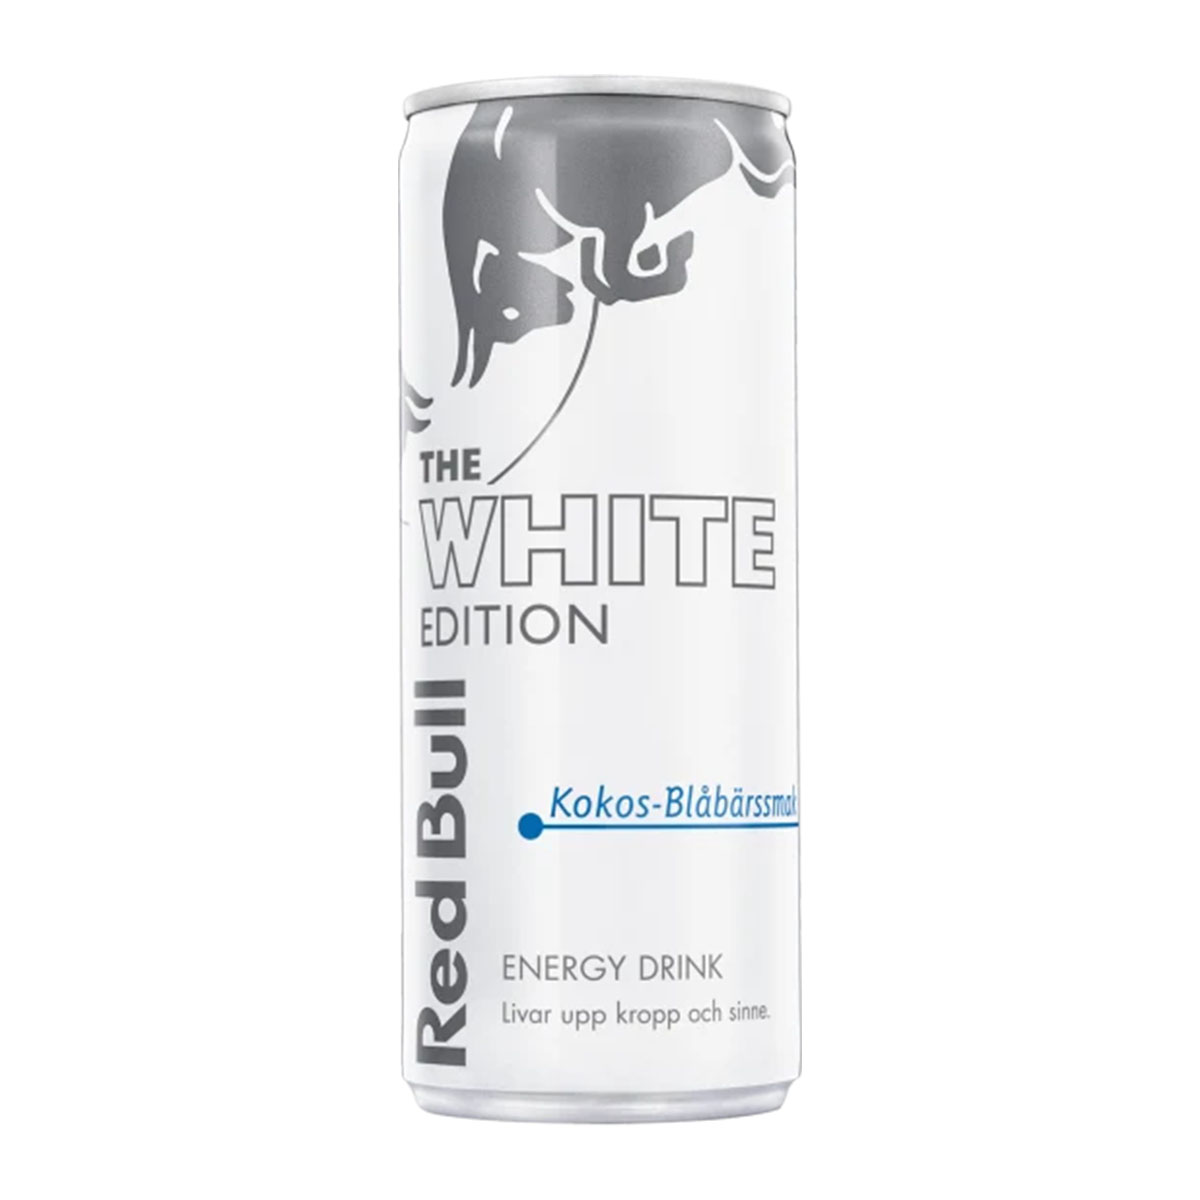 Energidryck, Red Bull white edition 25 cl